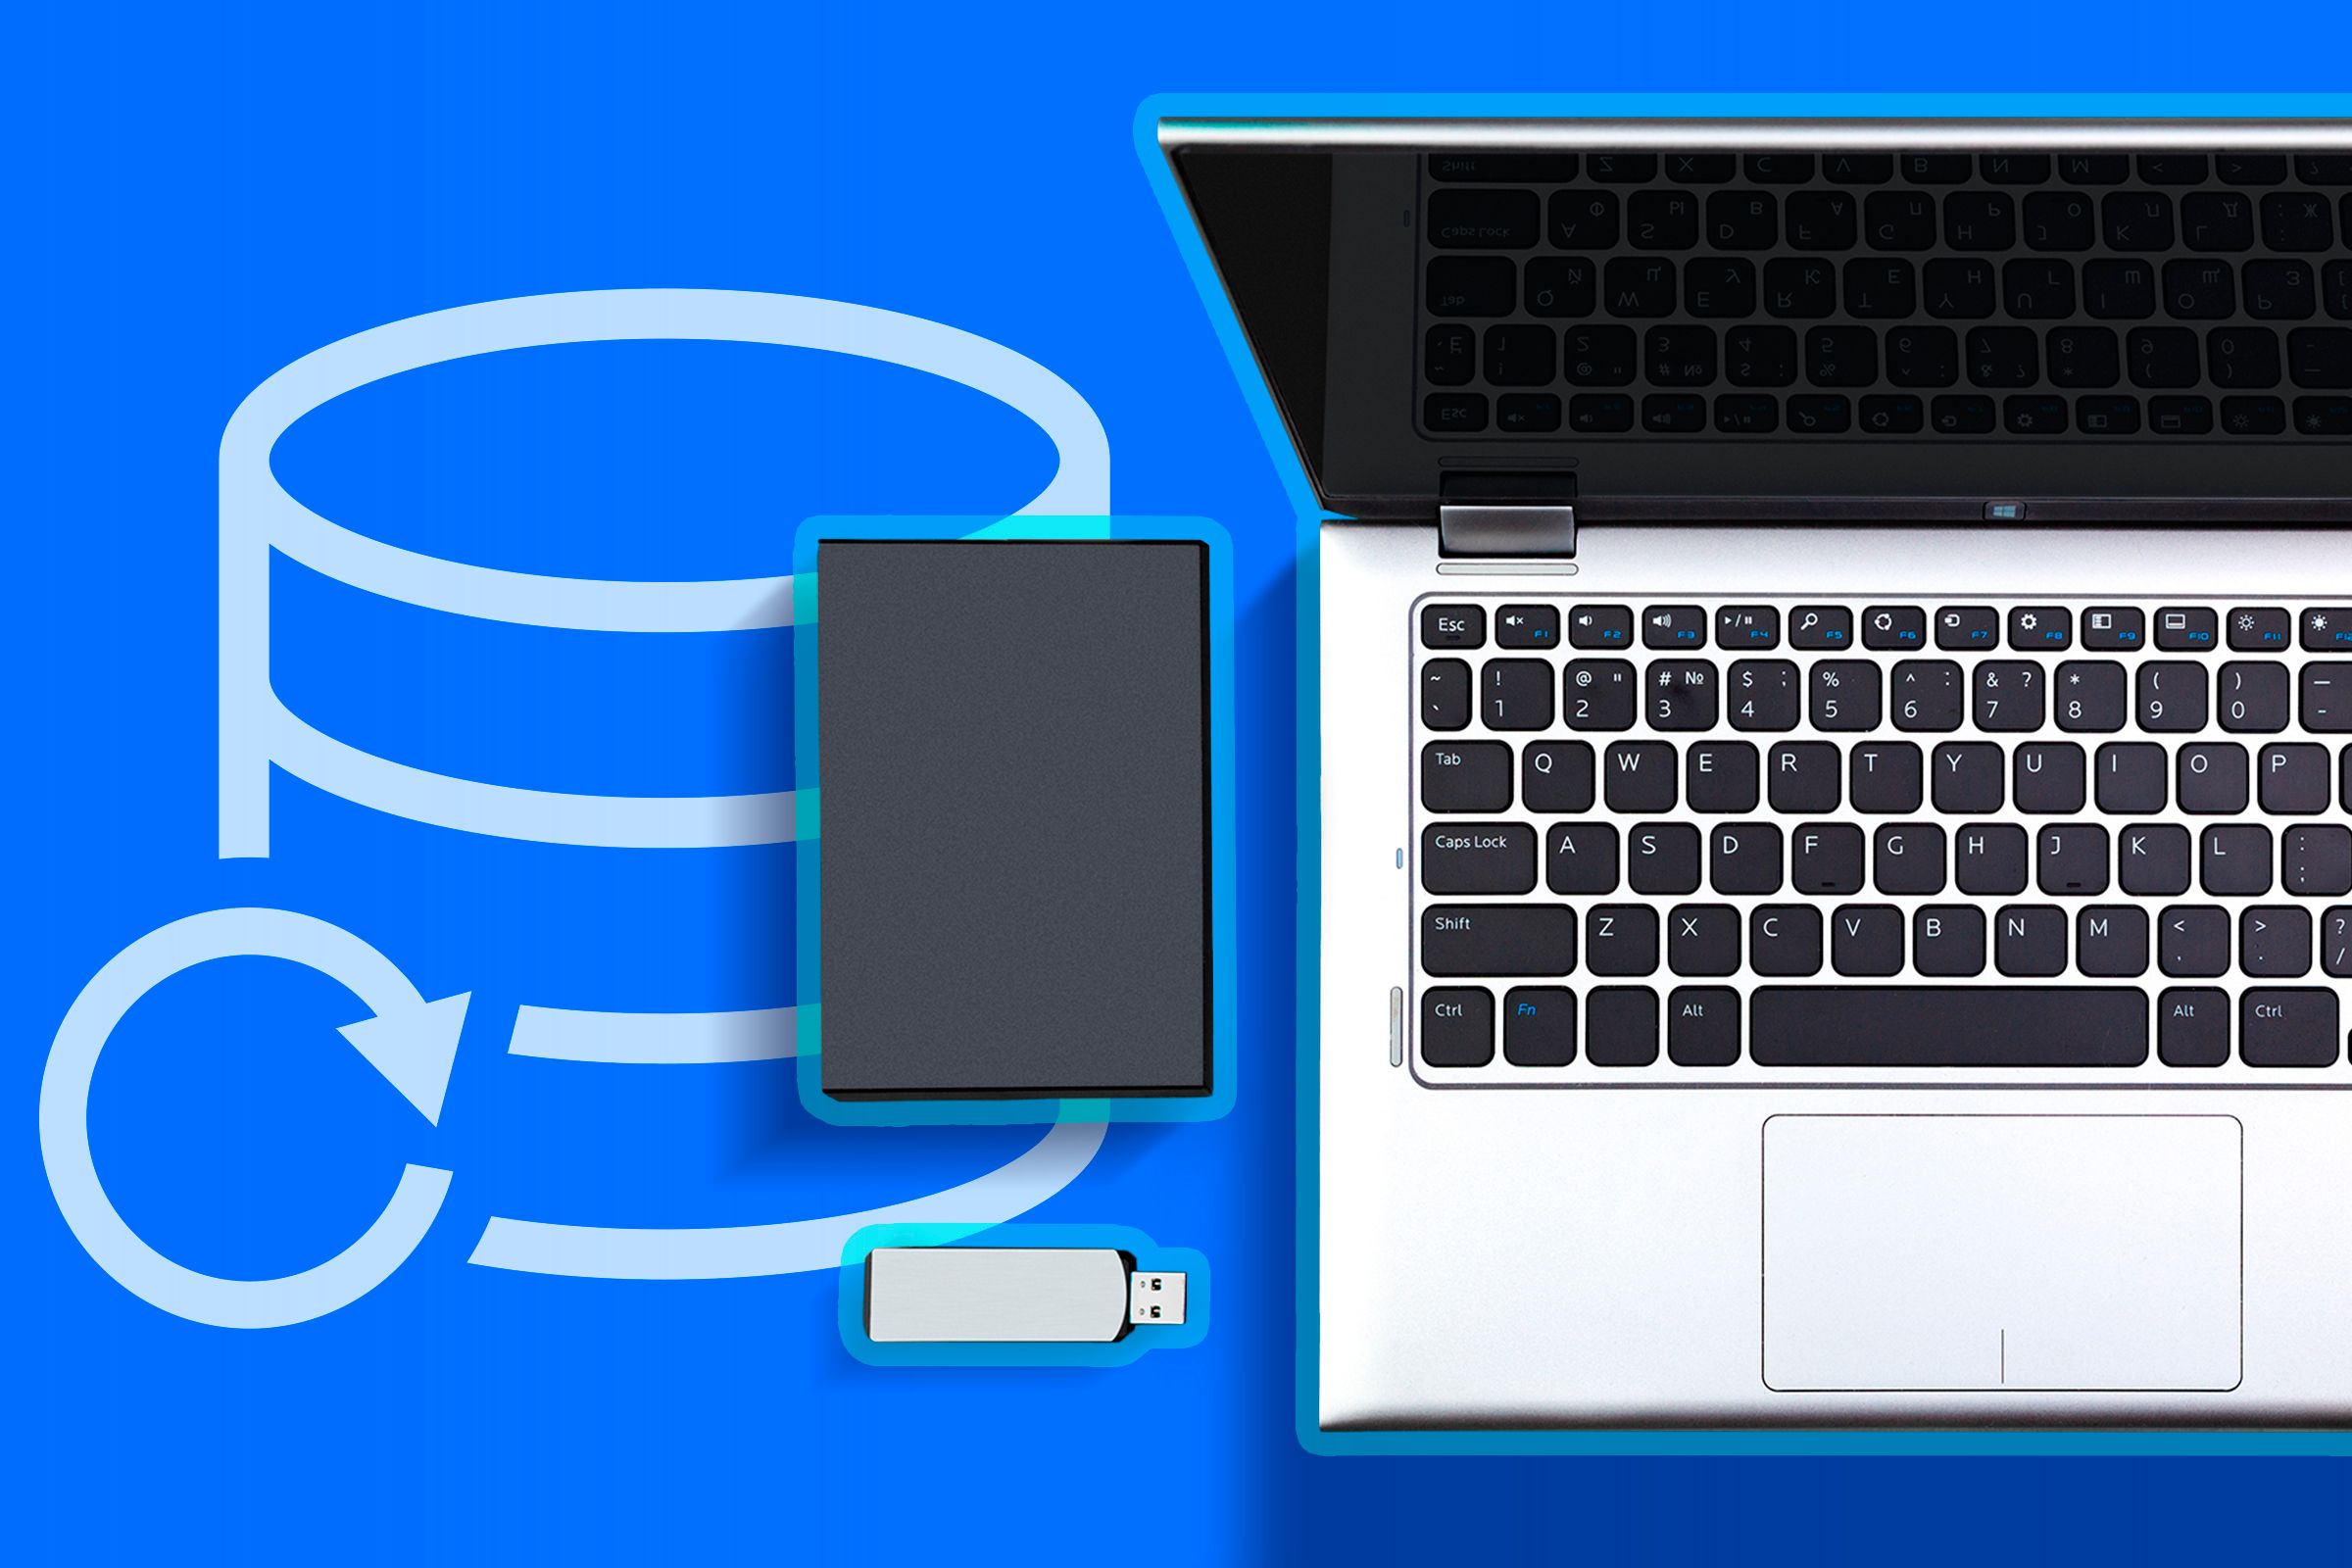 A laptop with a USB drive and an external hard drive next to it and a backup icon.